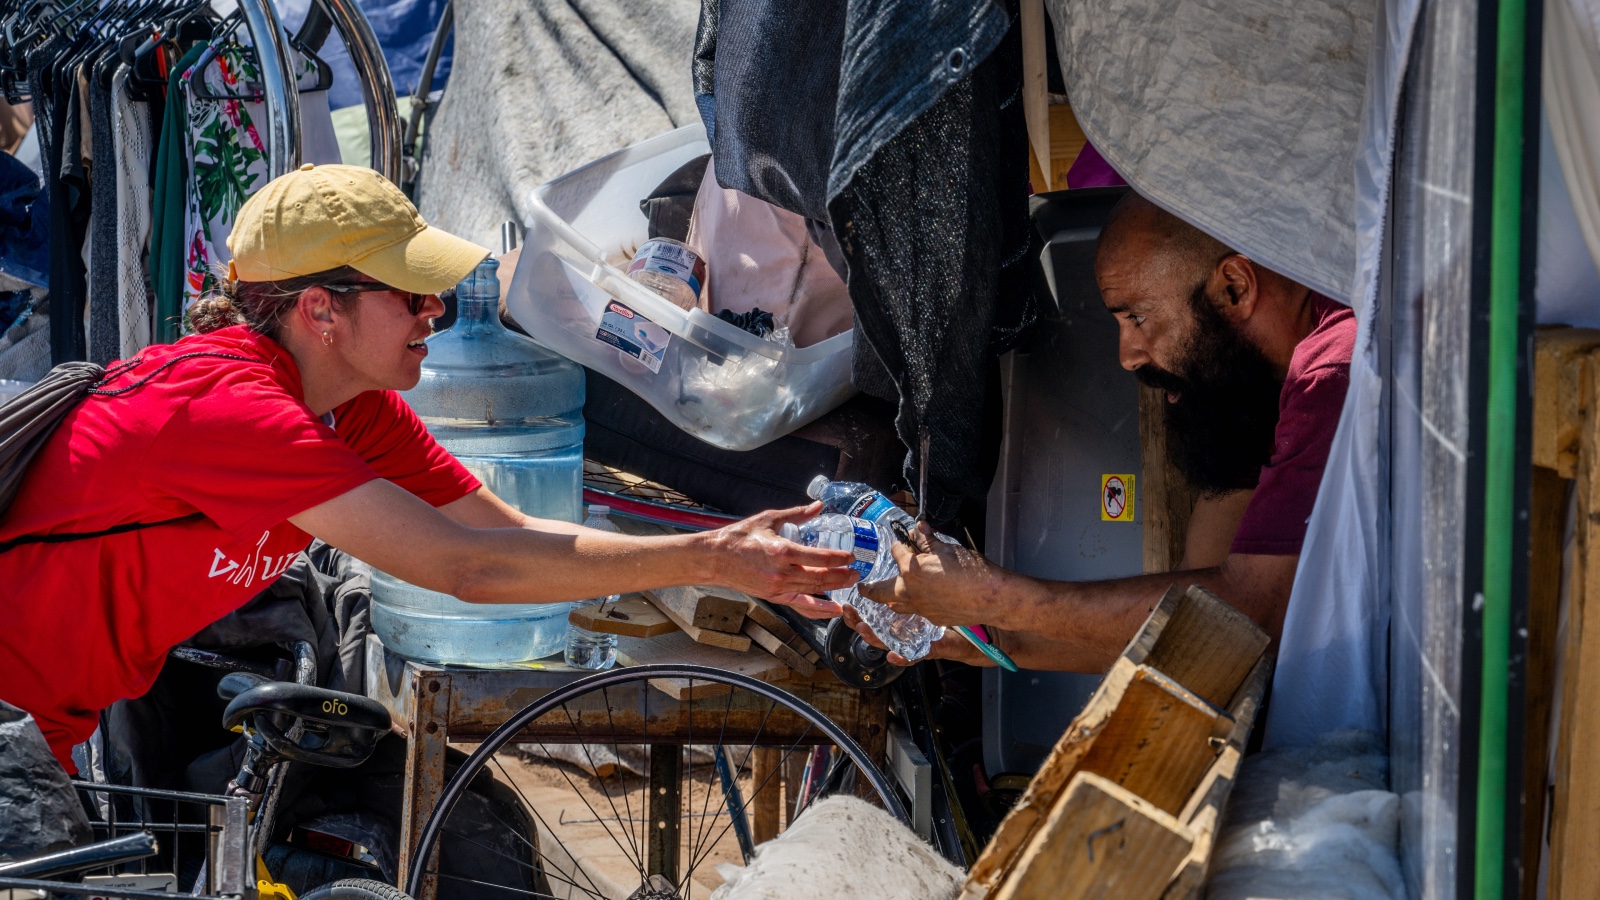 A volunteer hands out water to a person experiencing homelessness in Phoenix, Arizona, during a relentless, record-breaking heat wave in July 2023.